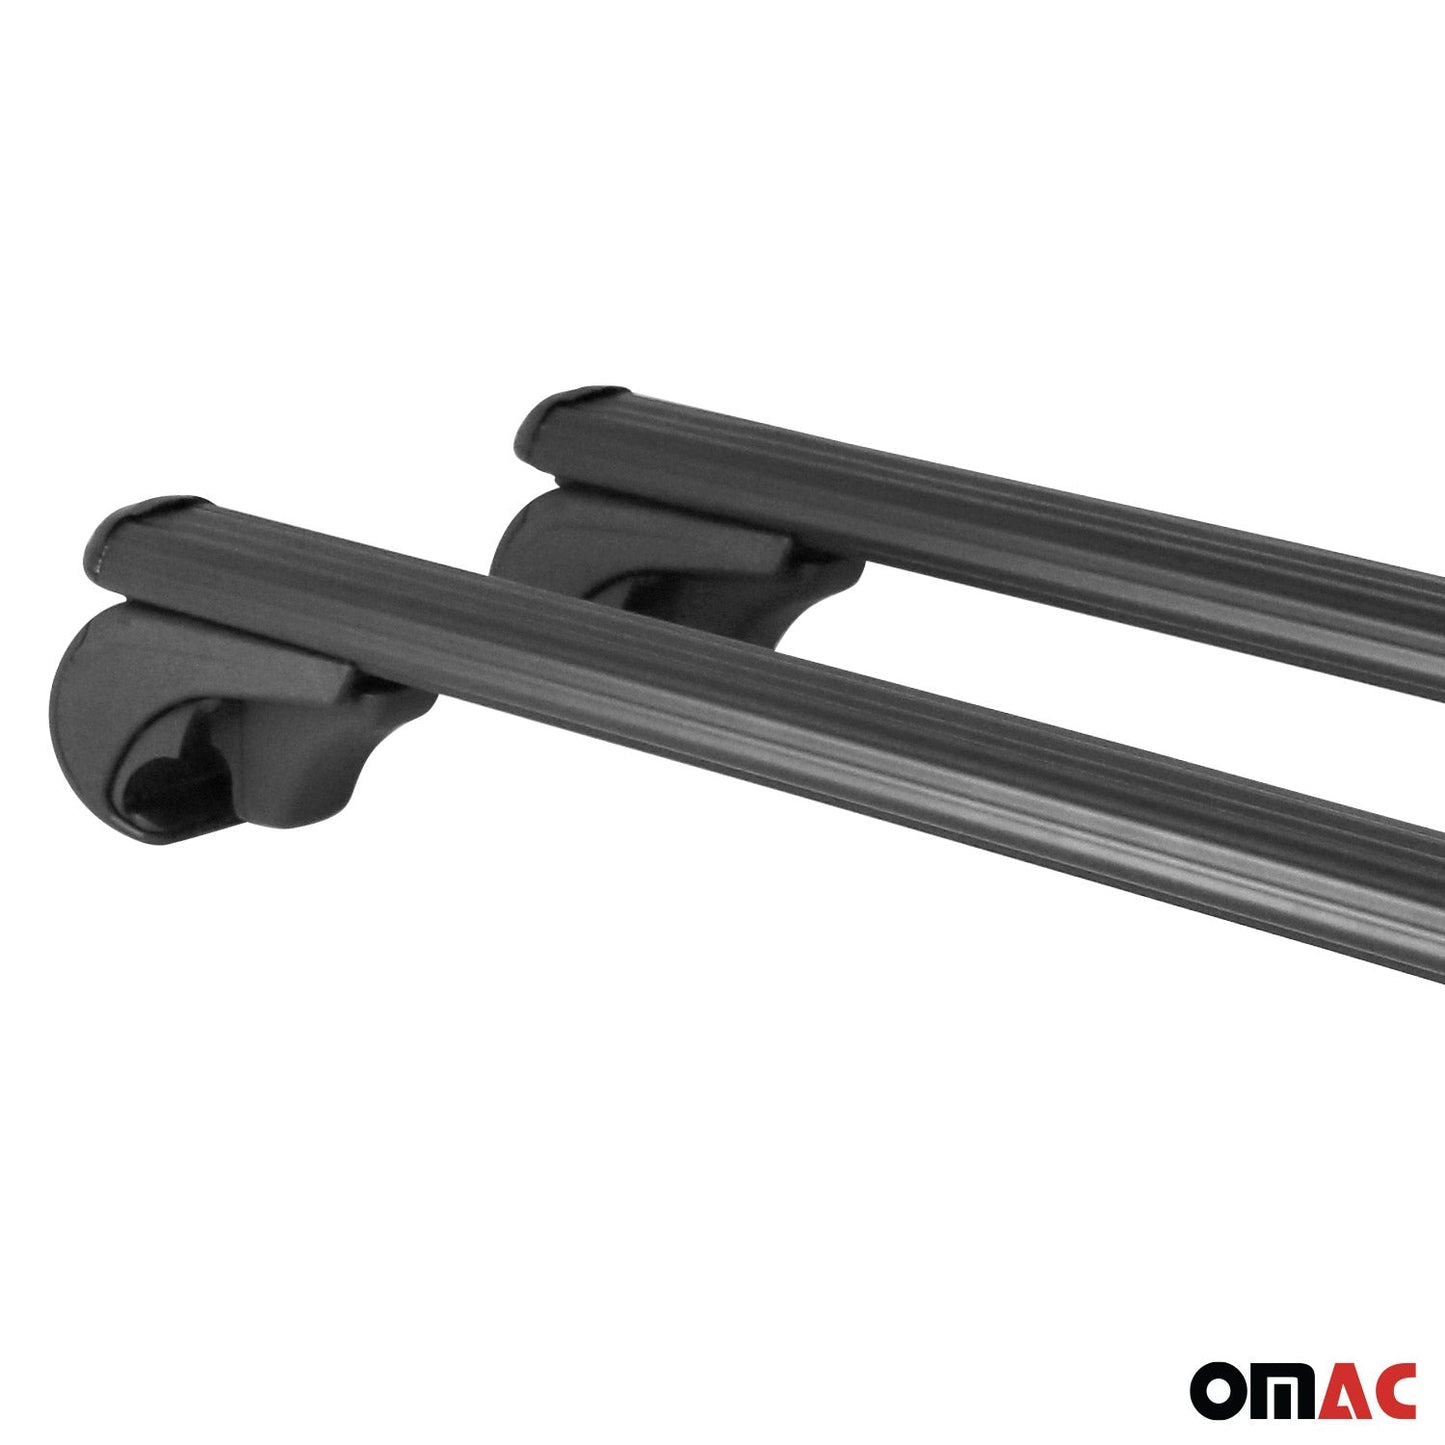 OMAC Roof Rack for BMW 3 Series Wagon E91 2007-2010 Cross Bars Luggage Carrier Black 12039696929MB